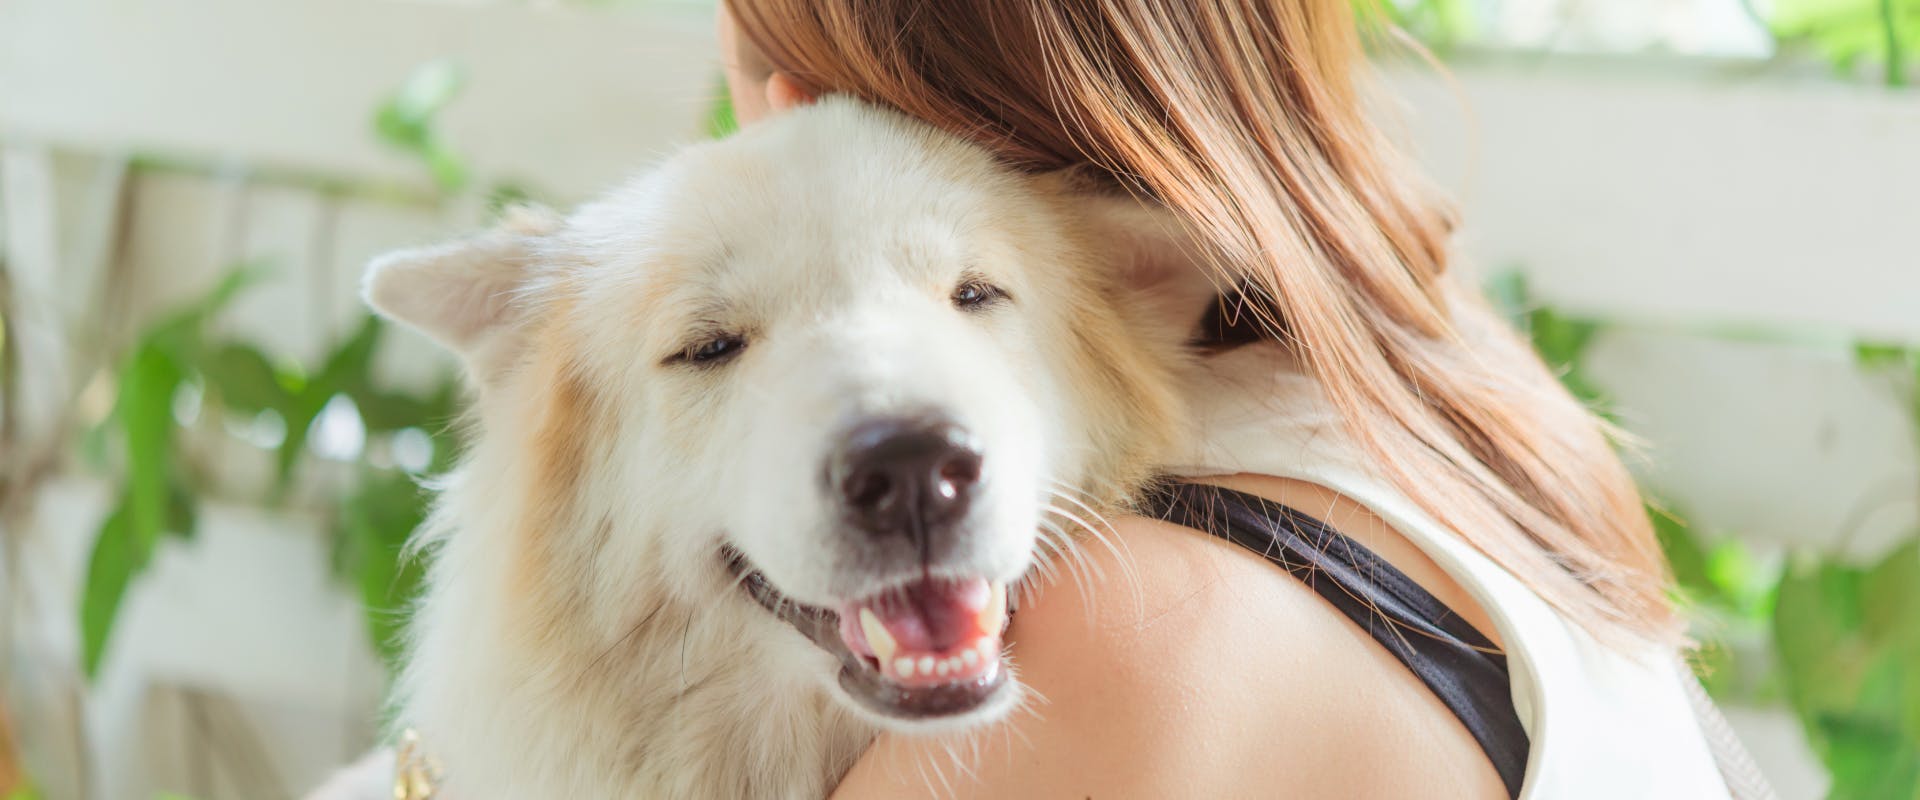 a samoyed resting its head on a person's shoulder with its eyes closed while its given a hug